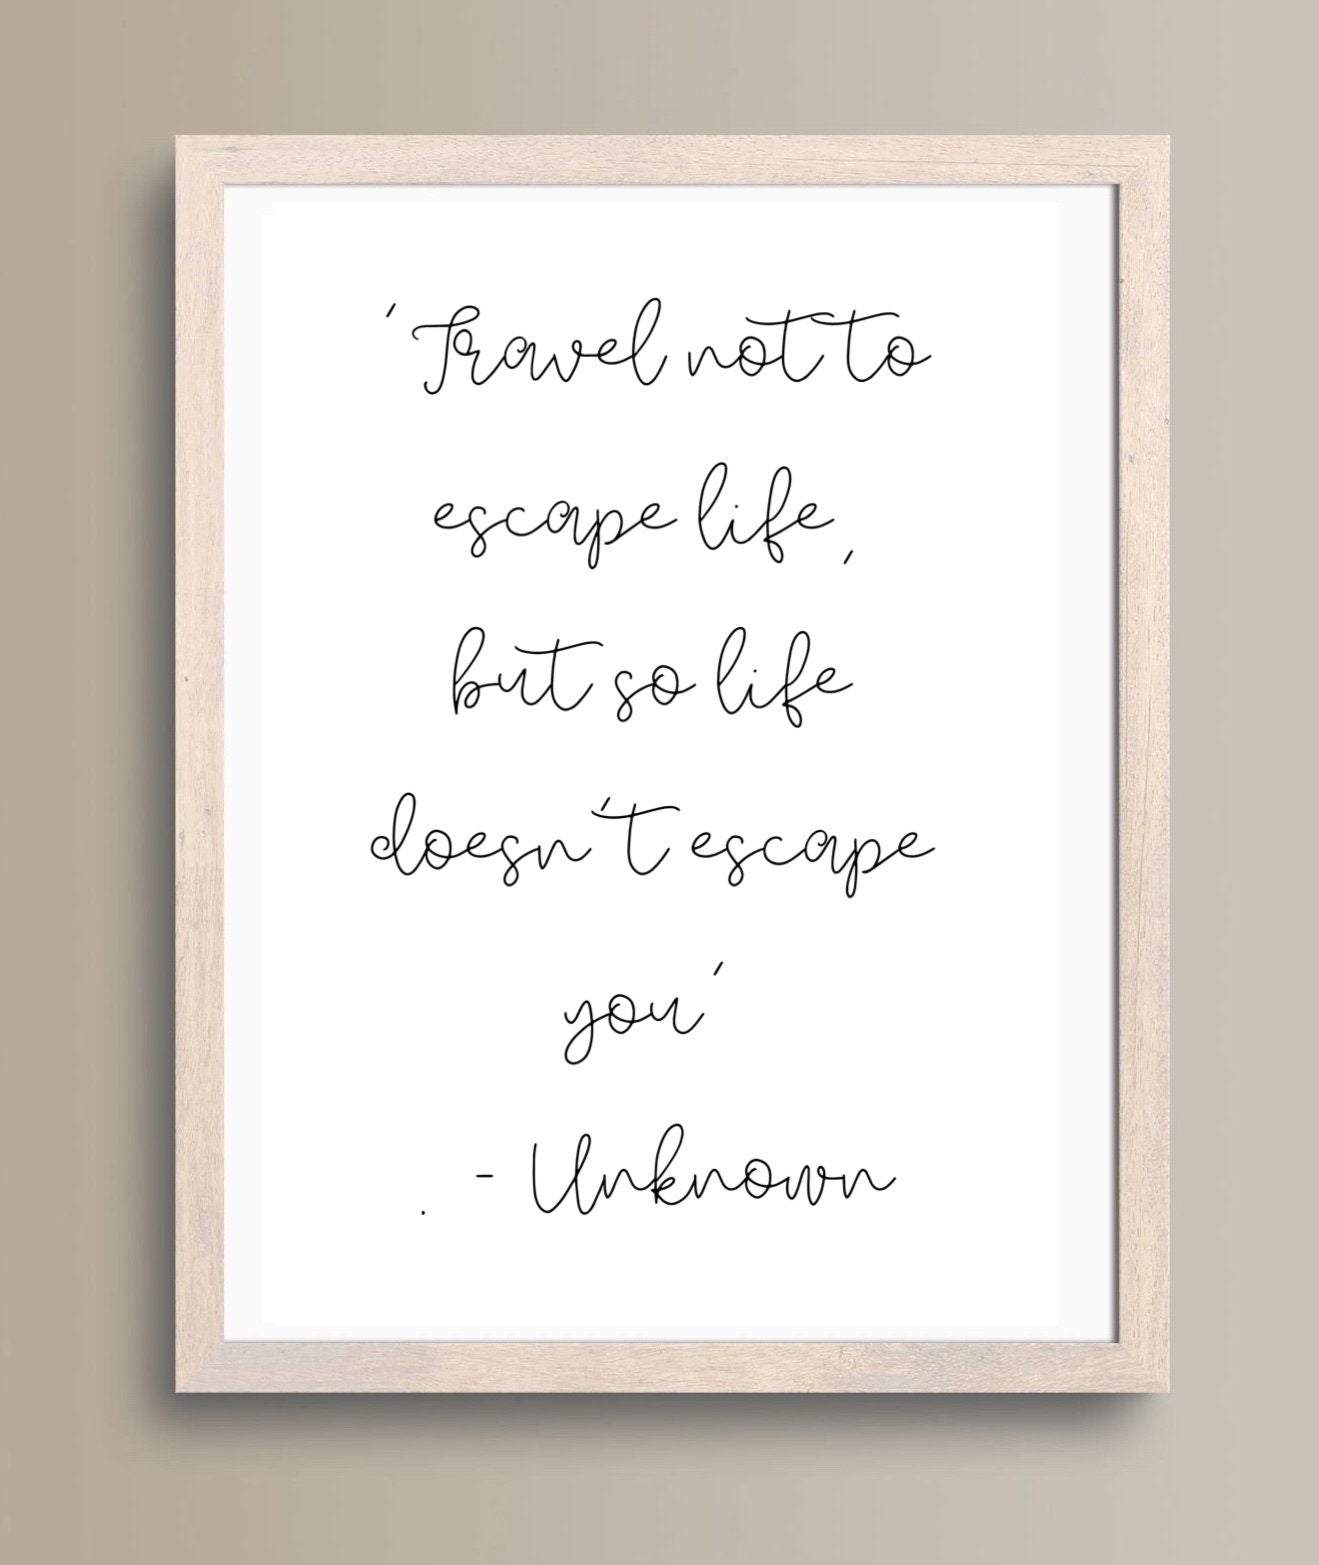 Travel Quote Print: ‘Travel not to escape life, but so that life doesn’t escape you’  Poster/ Cabin Crew Poster/ Flight Attendant Poster